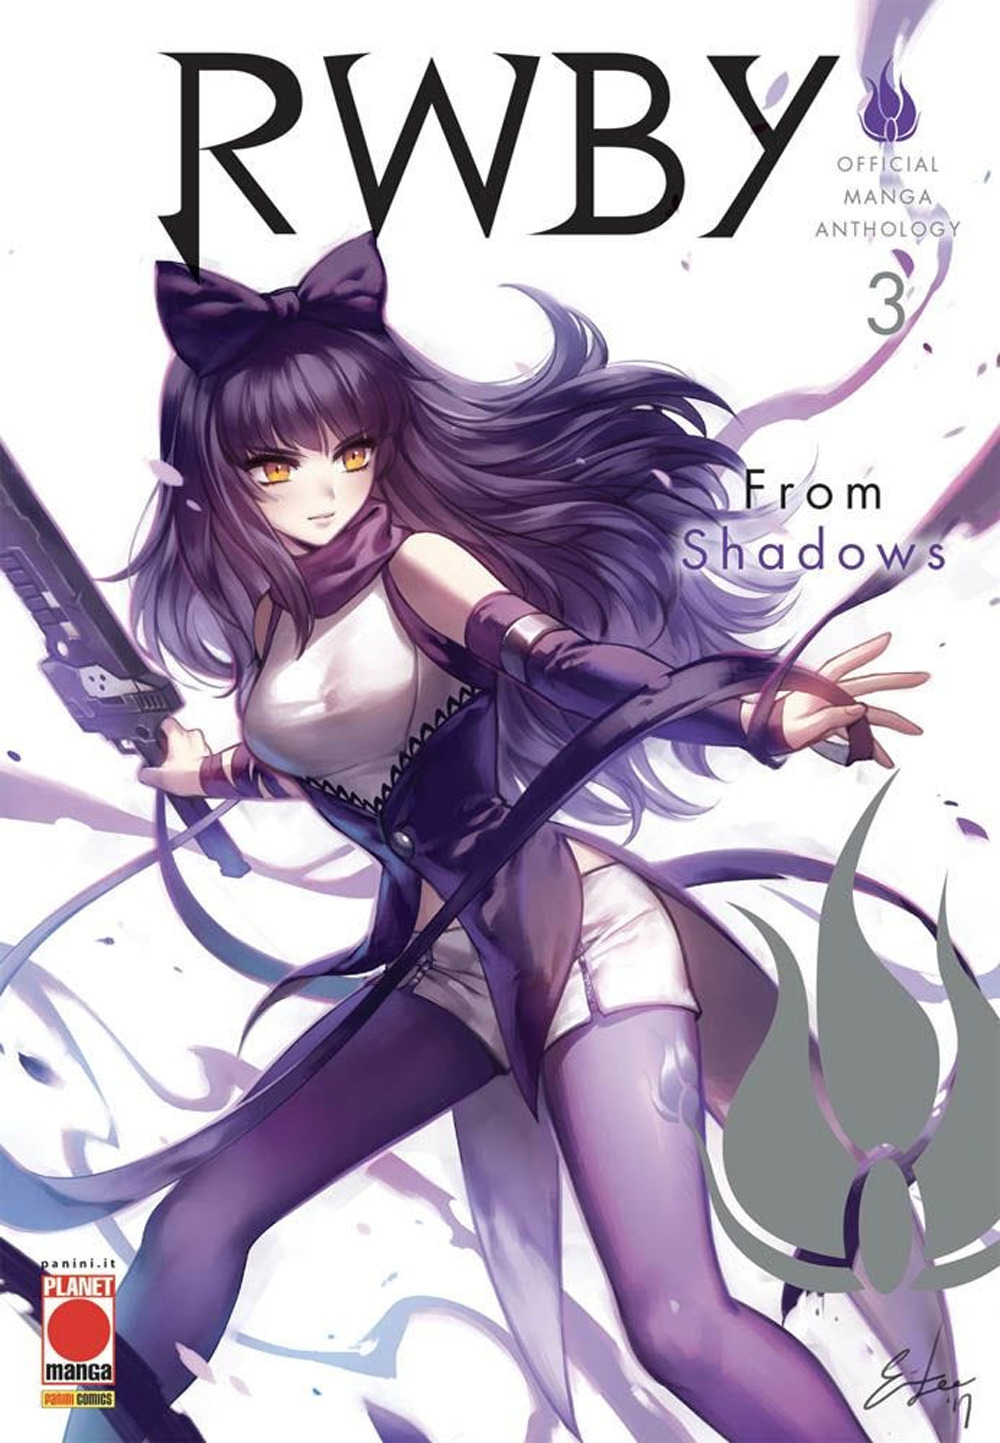 RWBY. Official manga anthology. Vol. 3: From shadows